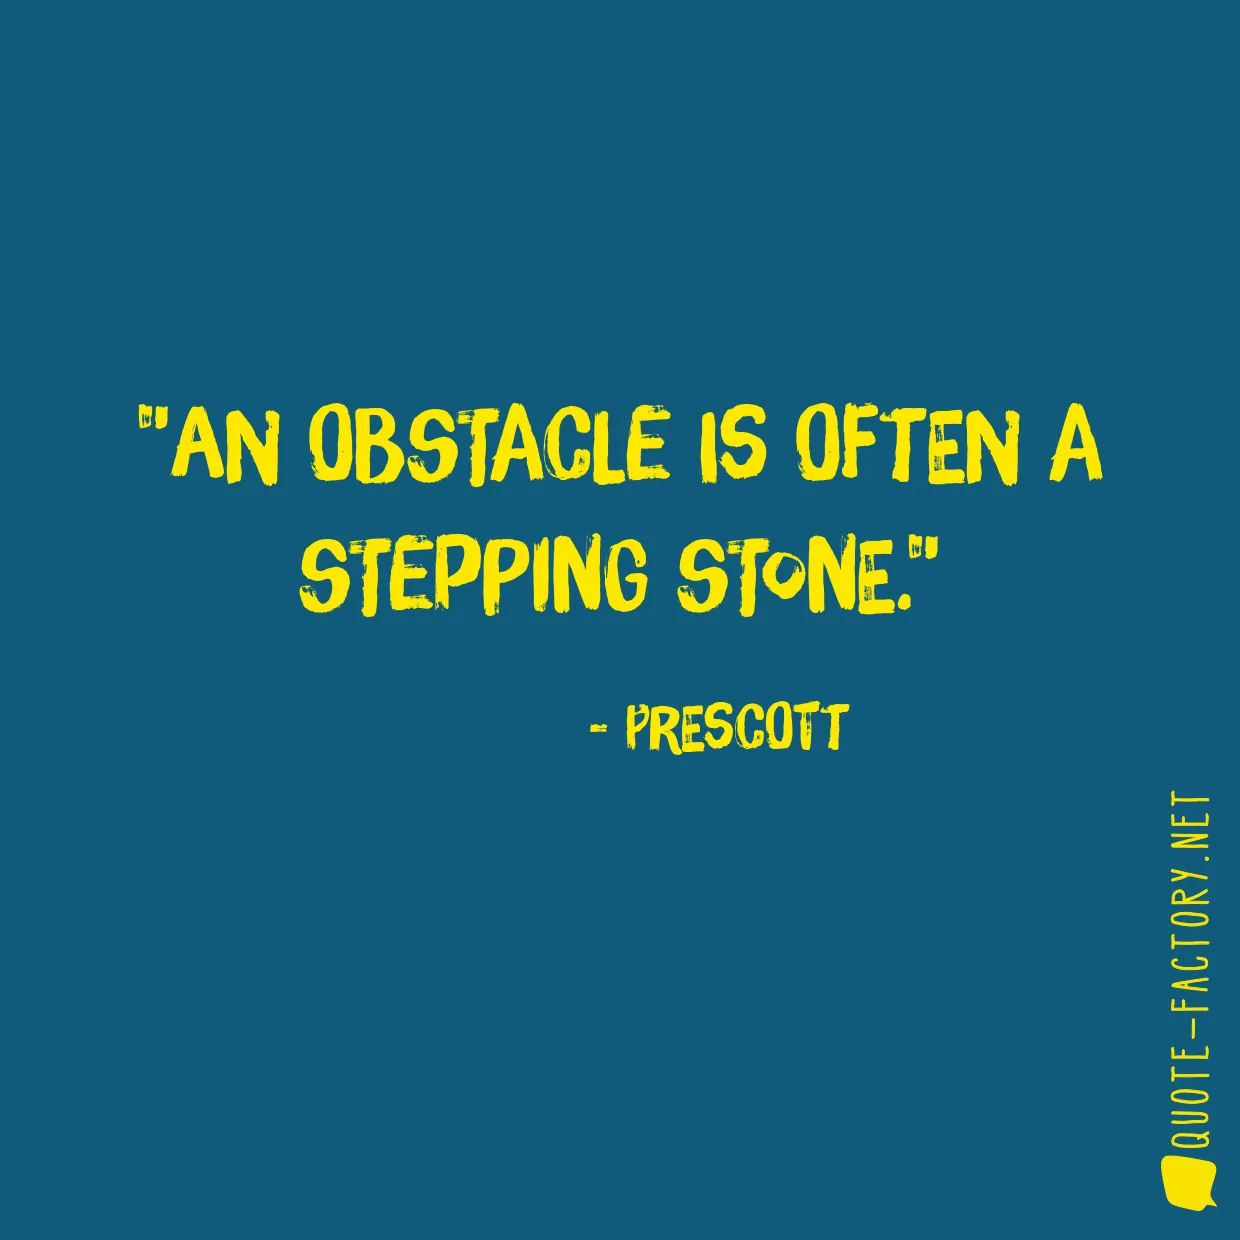 An obstacle is often a stepping stone.